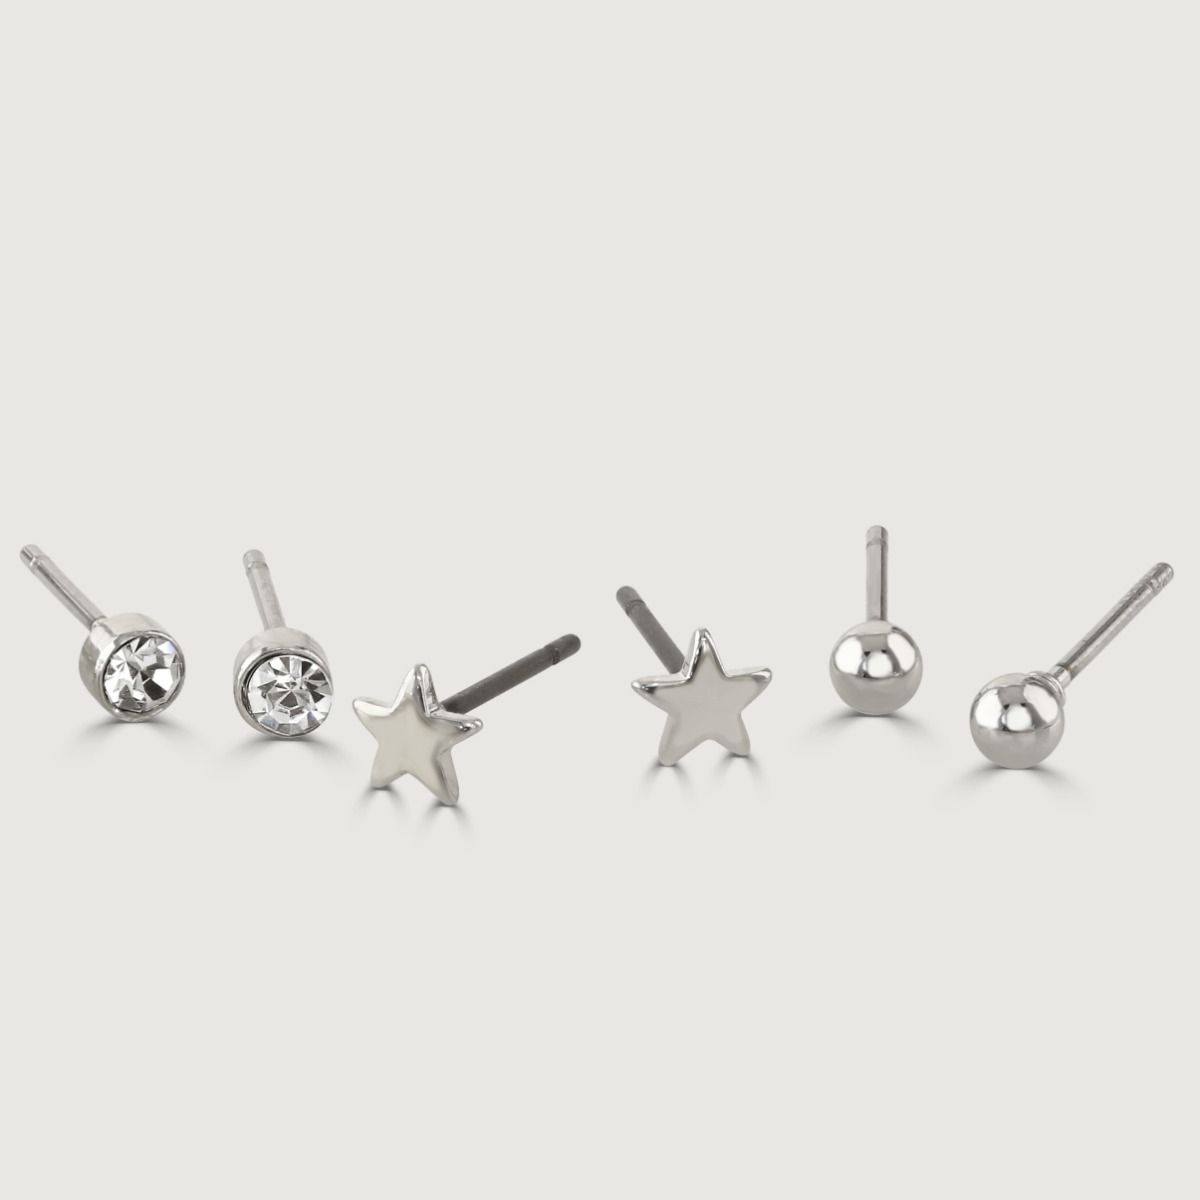 Elevate your earring game with this exquisite Set of Four Imitation Rhodium Earrings. Featuring a variety of styles, including plain studs, playful pineapple designs, sparkling crystal studs, and trendy hoop earrings, this collection offers versatility an